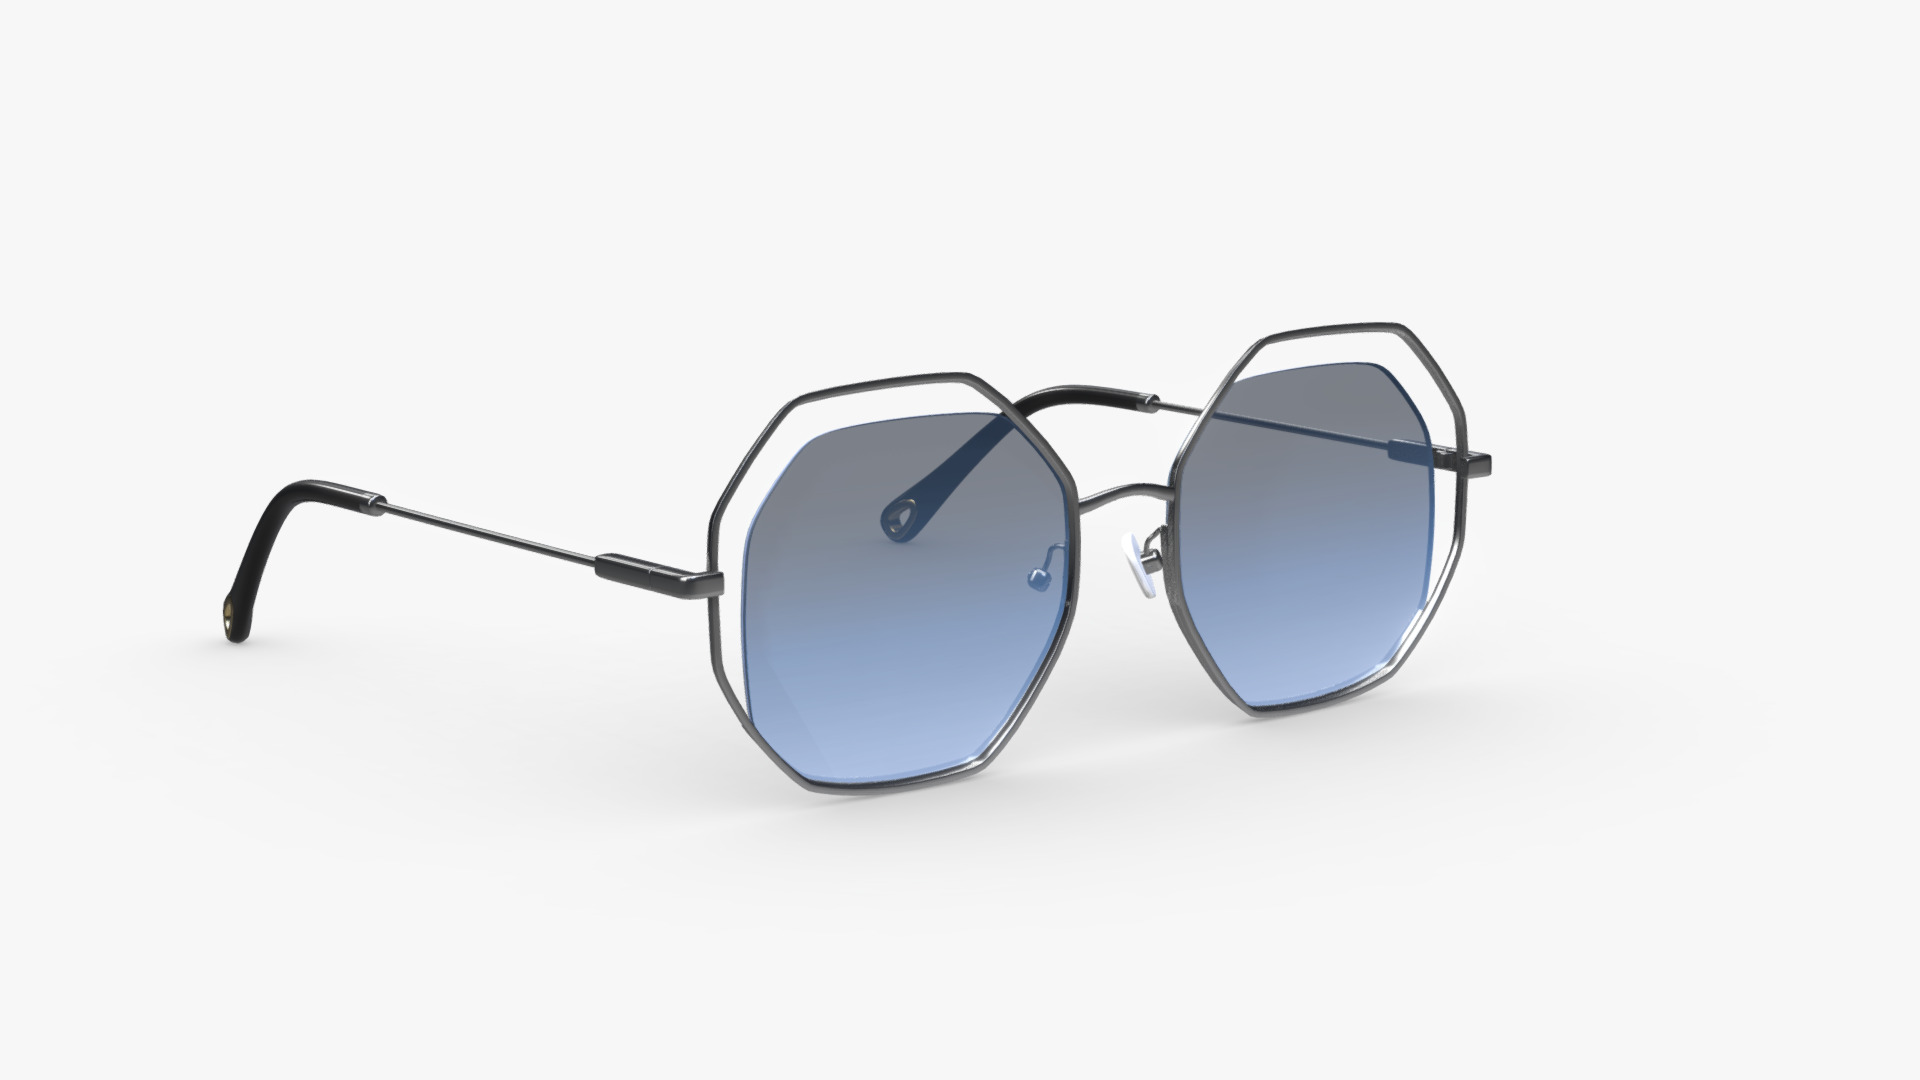 3D model Premium Geometric Sunglasses - This is a 3D model of the Premium Geometric Sunglasses. The 3D model is about a pair of glasses.